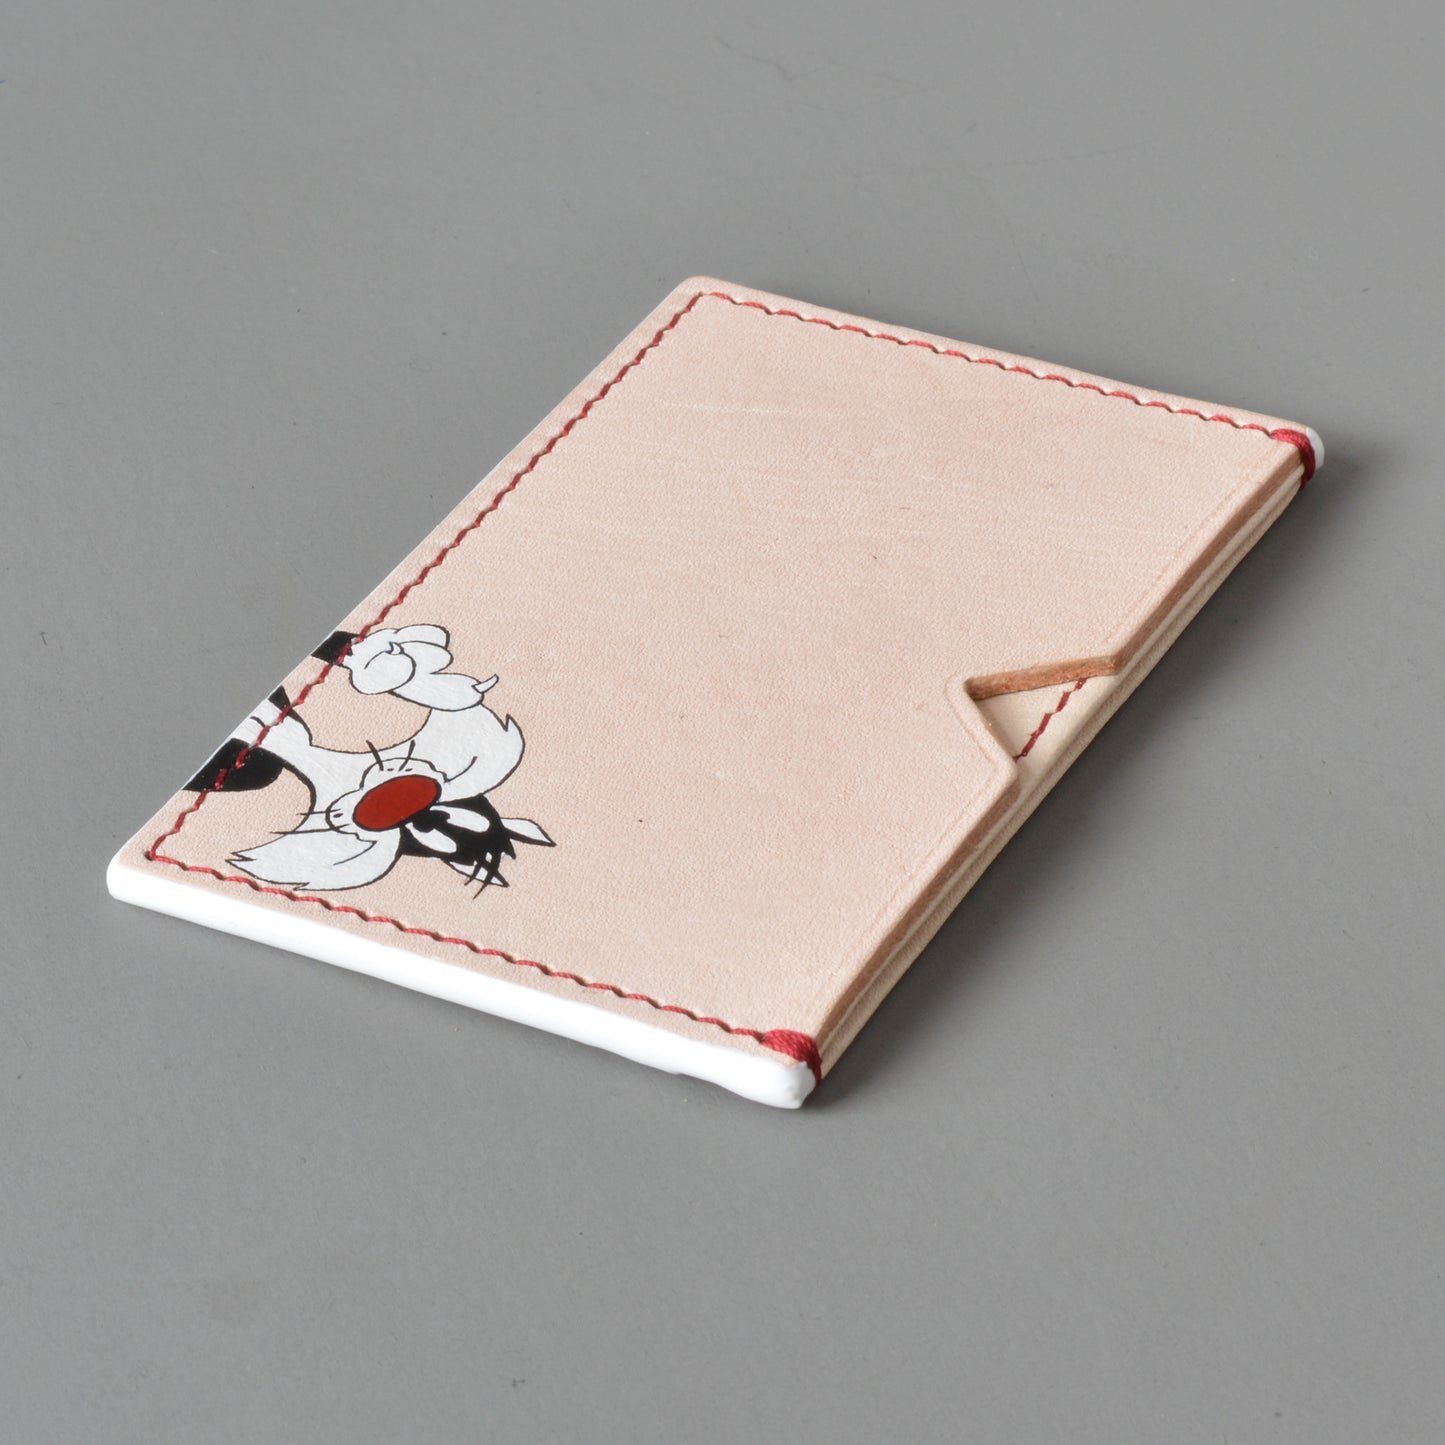 Card Wallet Sylvester The Cat